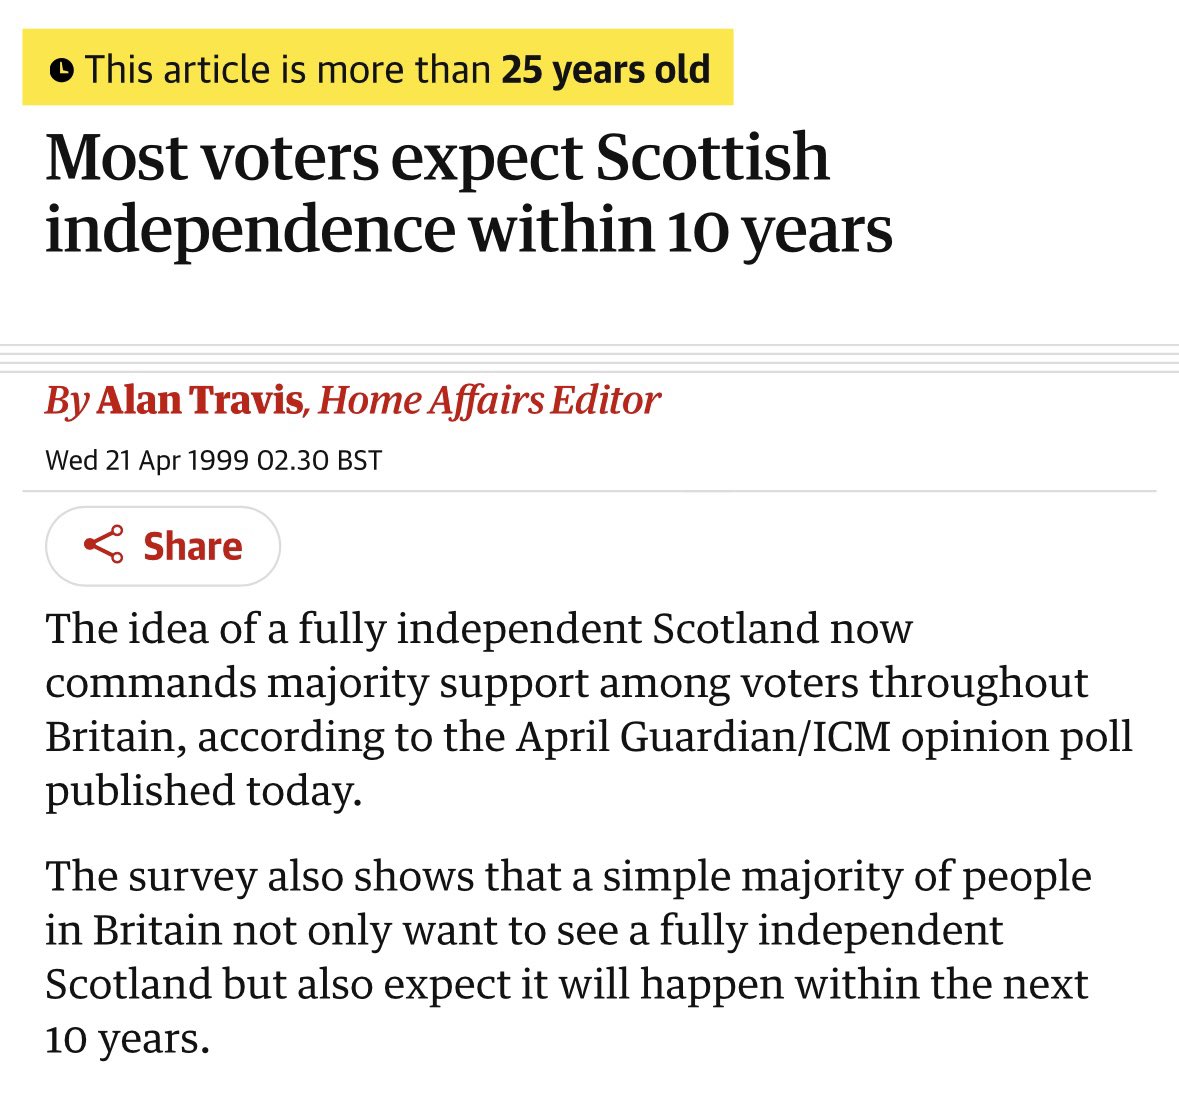 Most voters expect Scottish independence within 10 years. According to a poll published 25 years ago today.